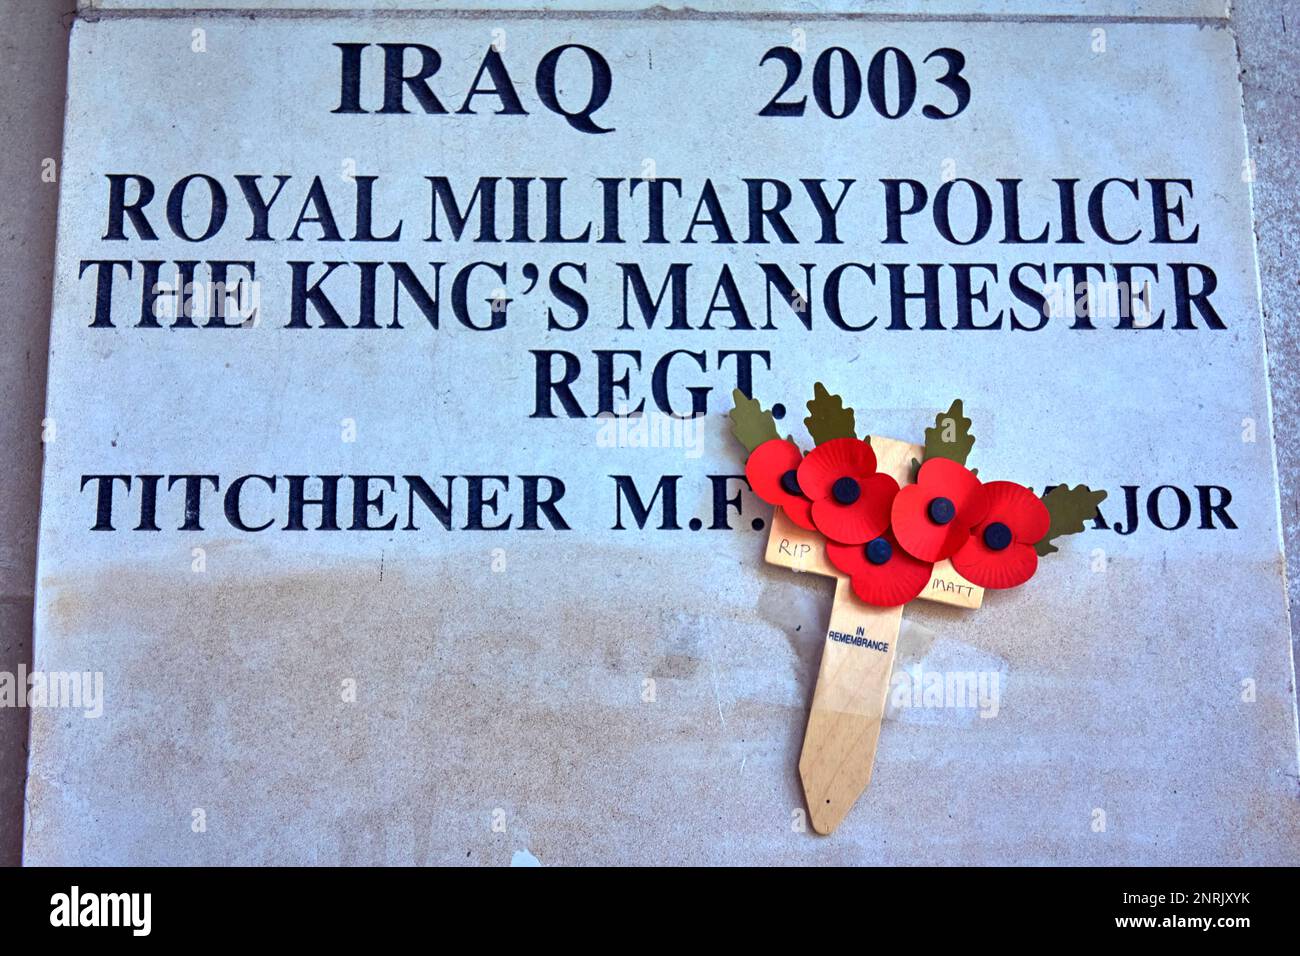 Memorial at Southport War Memorial to Major Matthew Titchener, an officer of The Royal Military Police The King's Manchester Regiment, killed in Iraq. Stock Photo